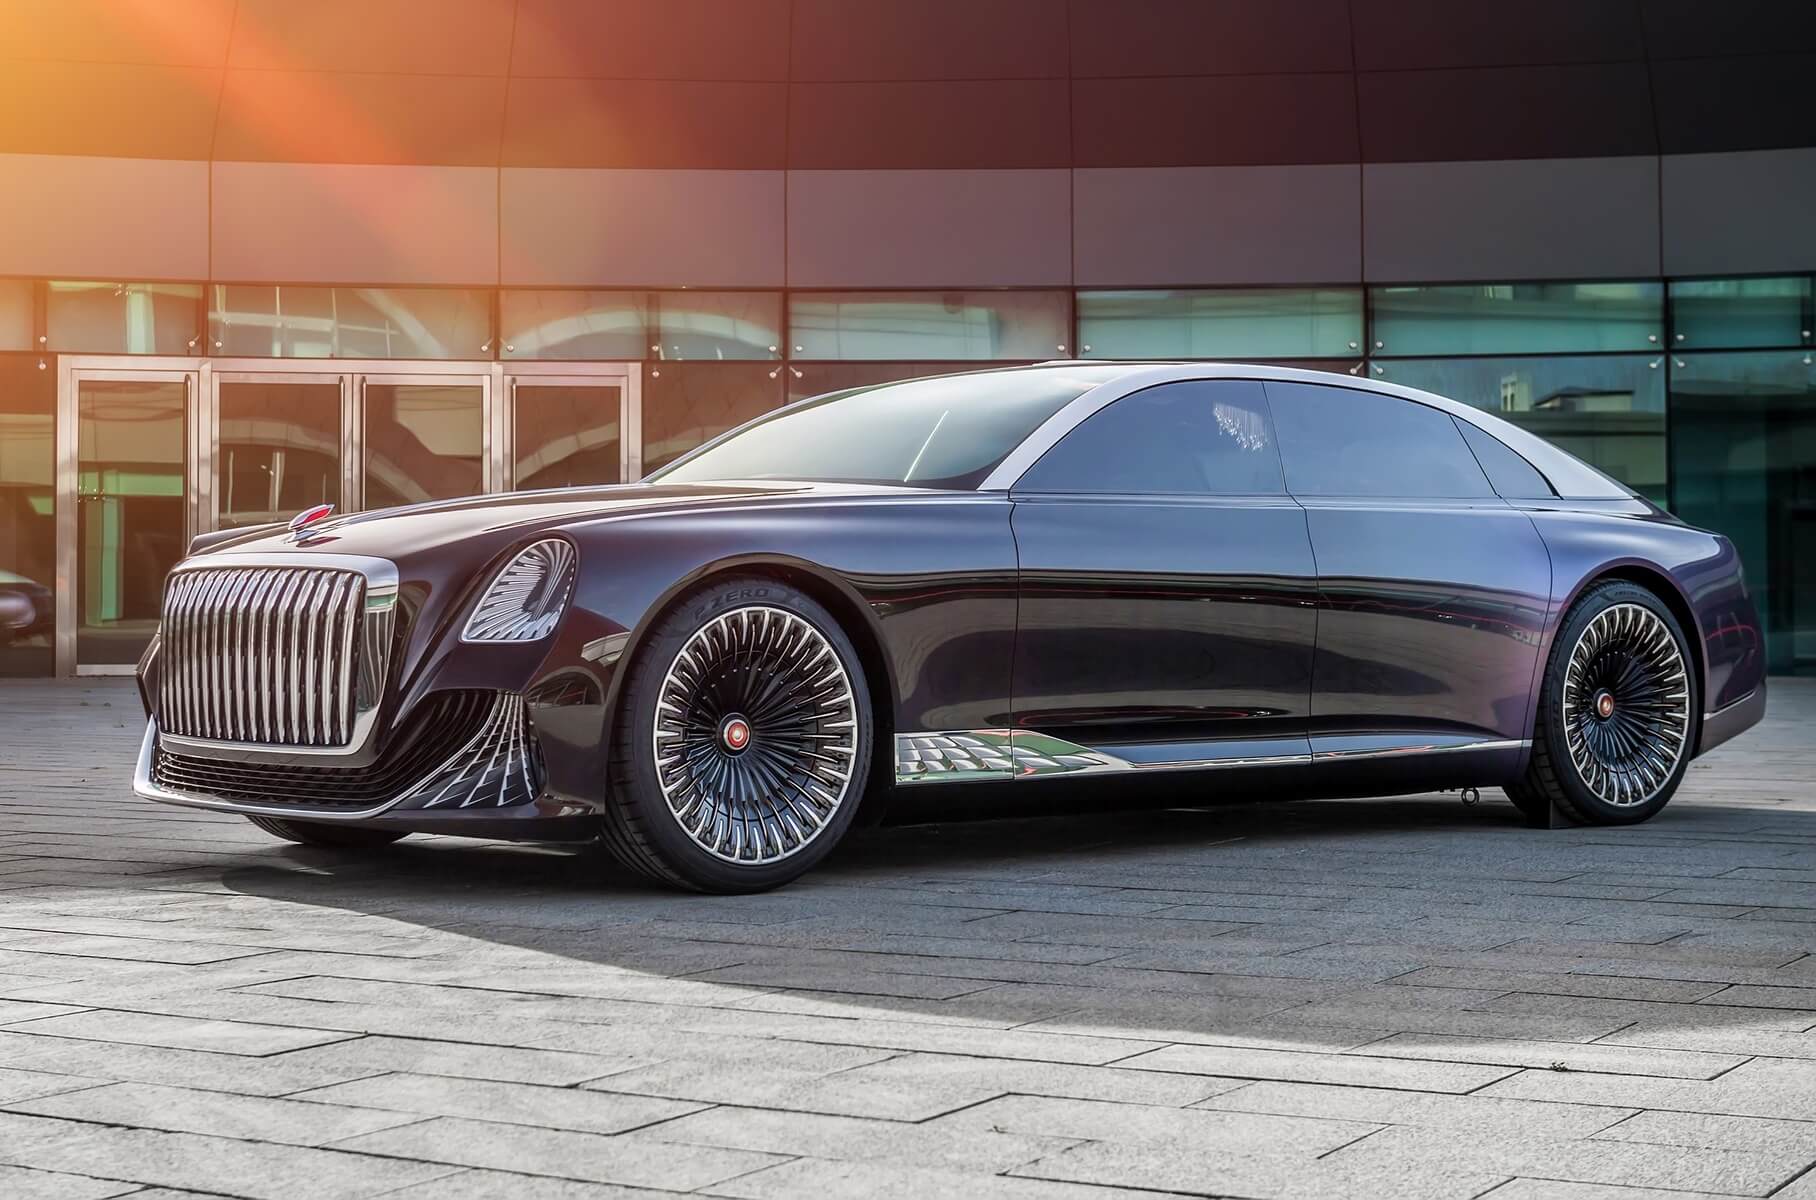 Hongqi brand will release Guoya sedan to compete with Mercedes-Maybach S-Class